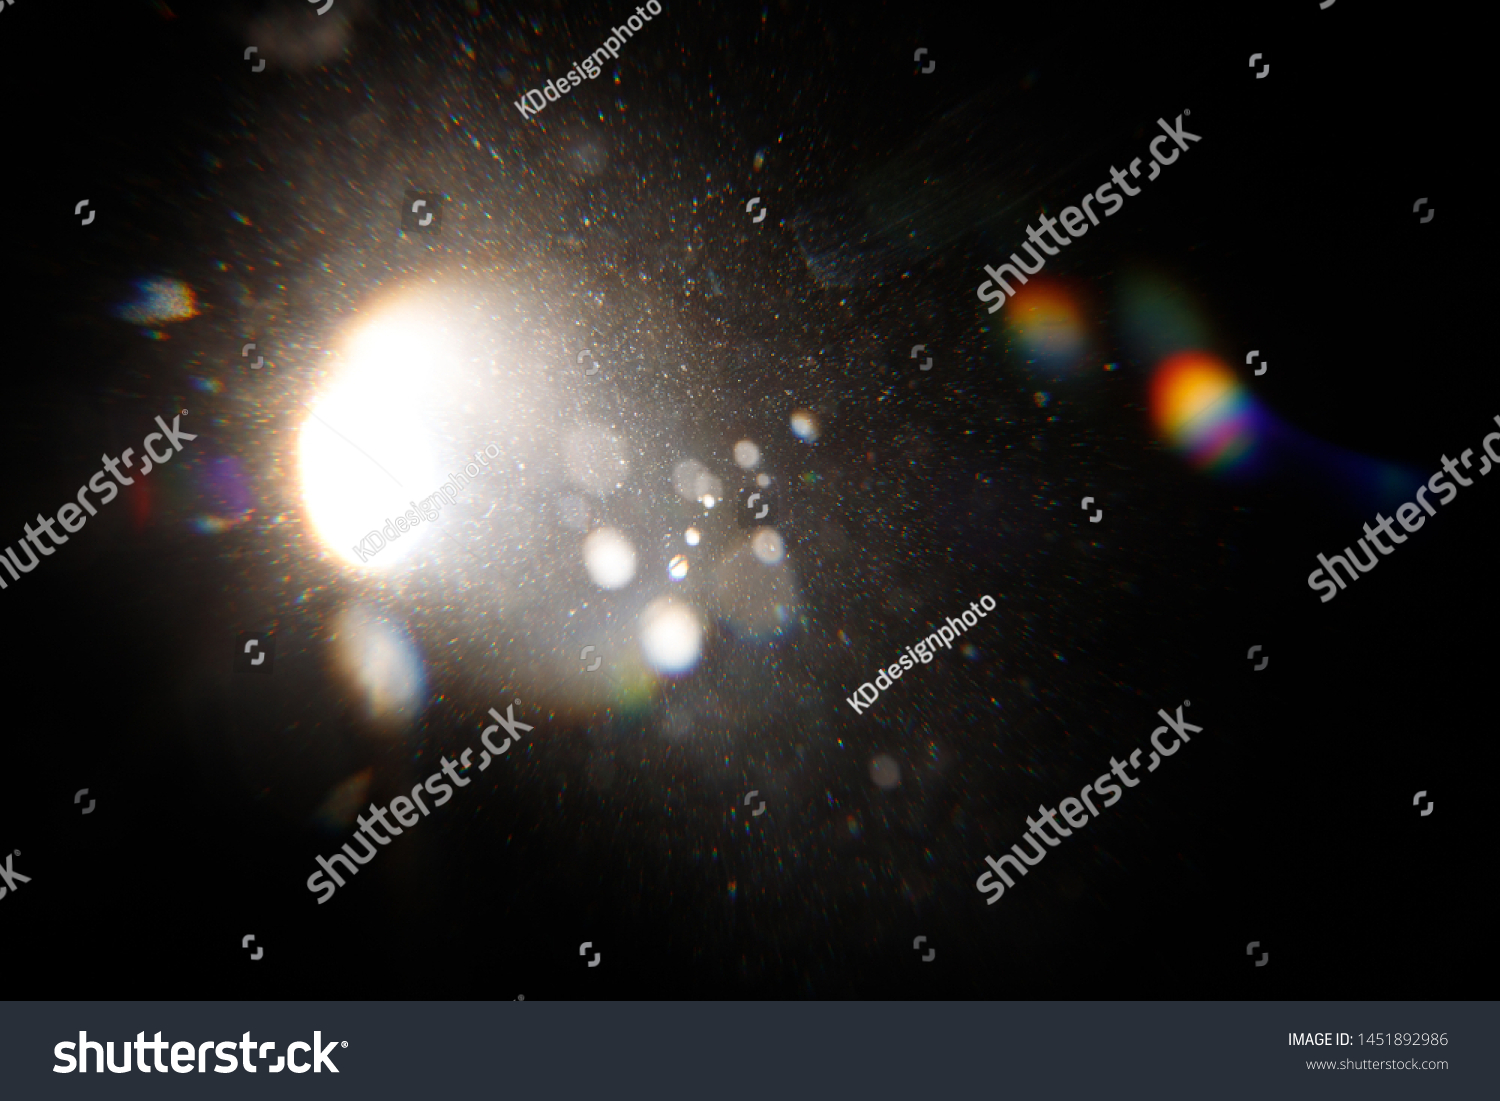 Lens Flare. Light over black background. Easy to add overlay or screen filter over photos. Abstract sun burst with digital lens flare background. Gleams rounded and hexagonal shapes, rainbow halo. #1451892986